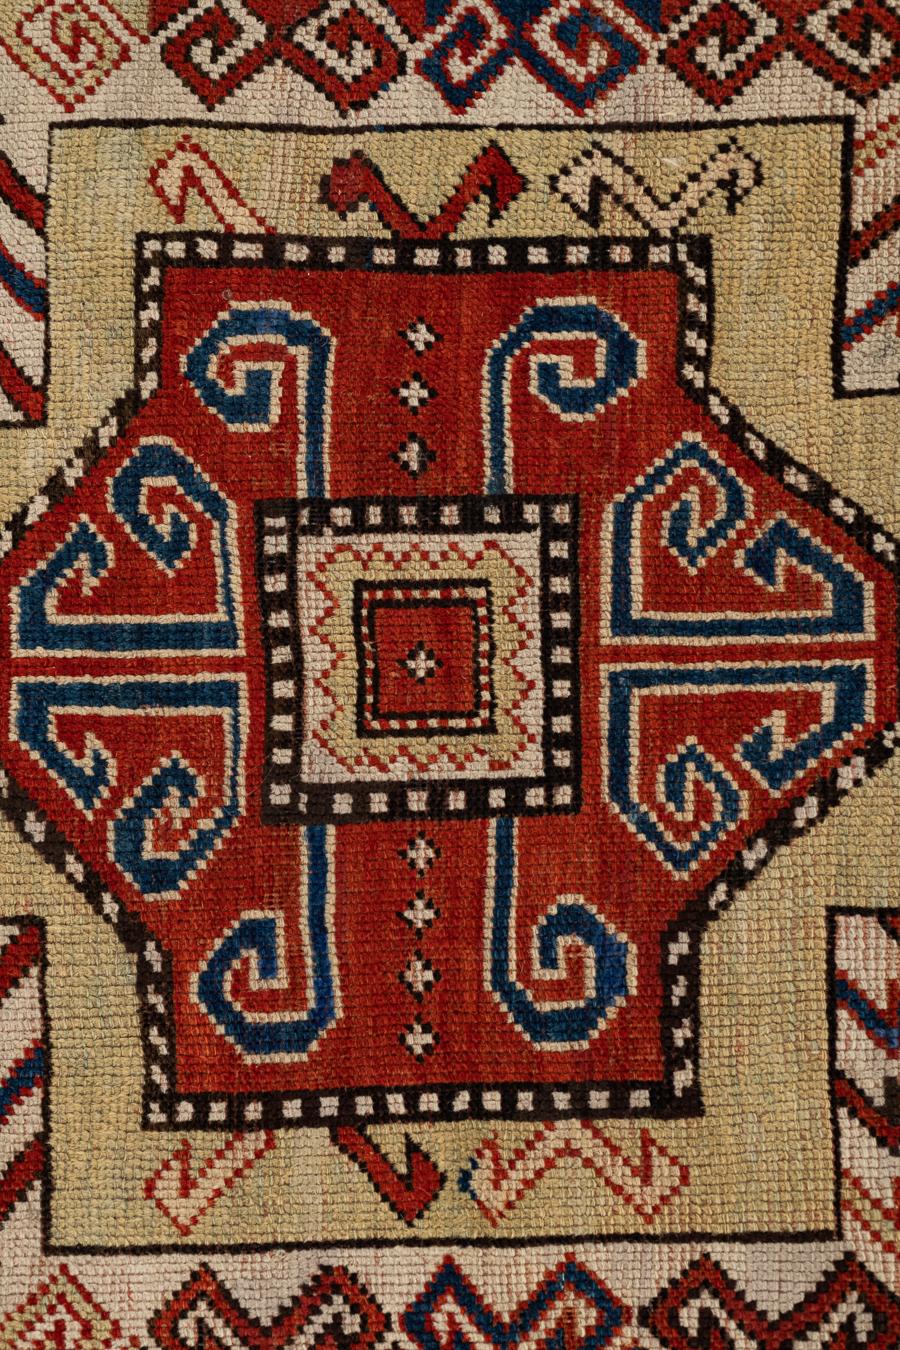 Sewan – Kazak, Central Caucasus

Long prized by experts, Sewans like this one are produced near Lake Sewan, which is high in the Caucasus Mountains. This sublime rug demonstrates the aesthetics of a tradition full of countless secular symbols.